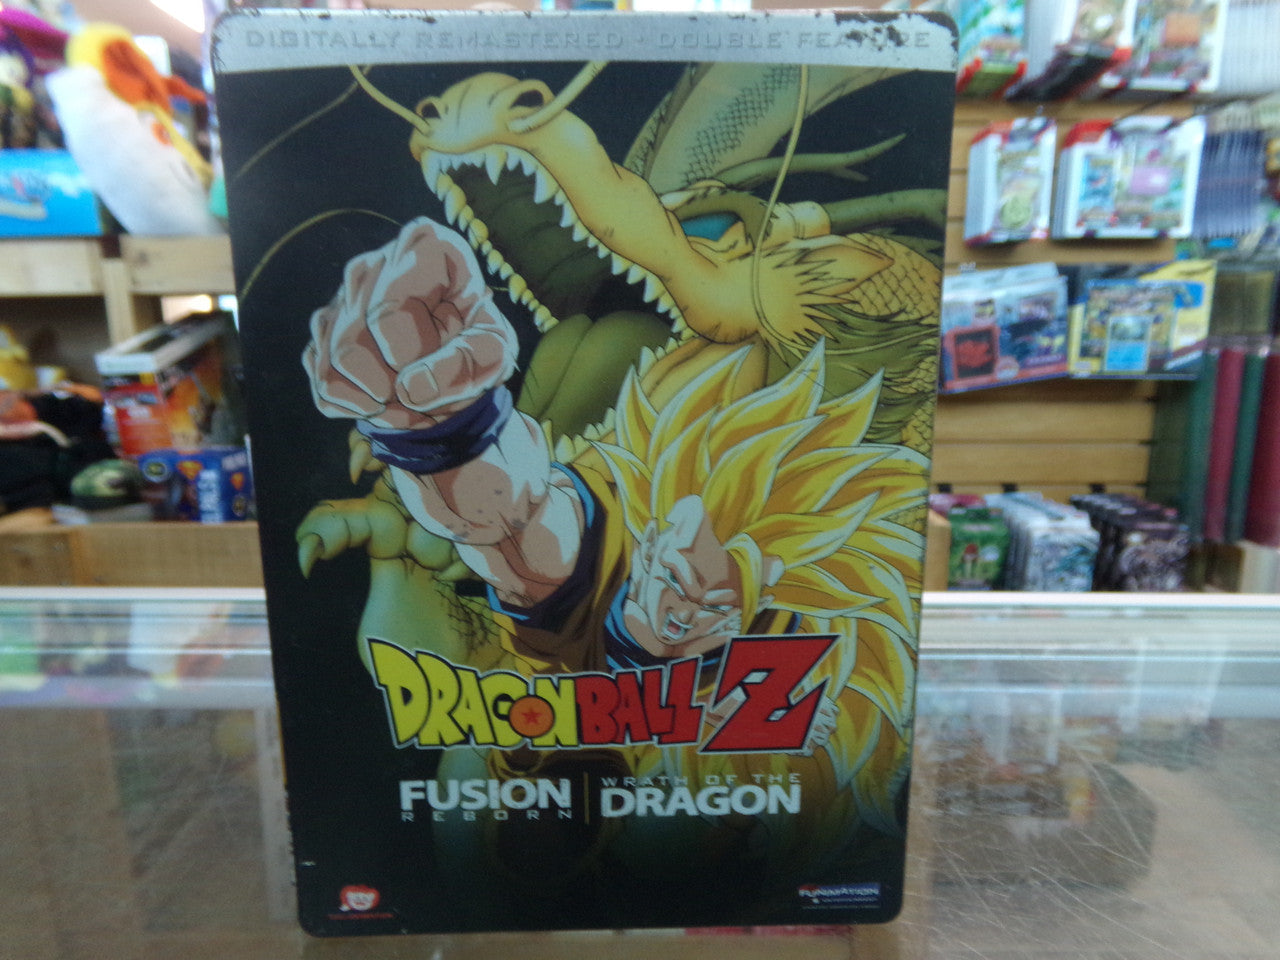 Dragon Ball Z: Fusion Reborn/Wrath of the Dragon Double Feature DVD Used